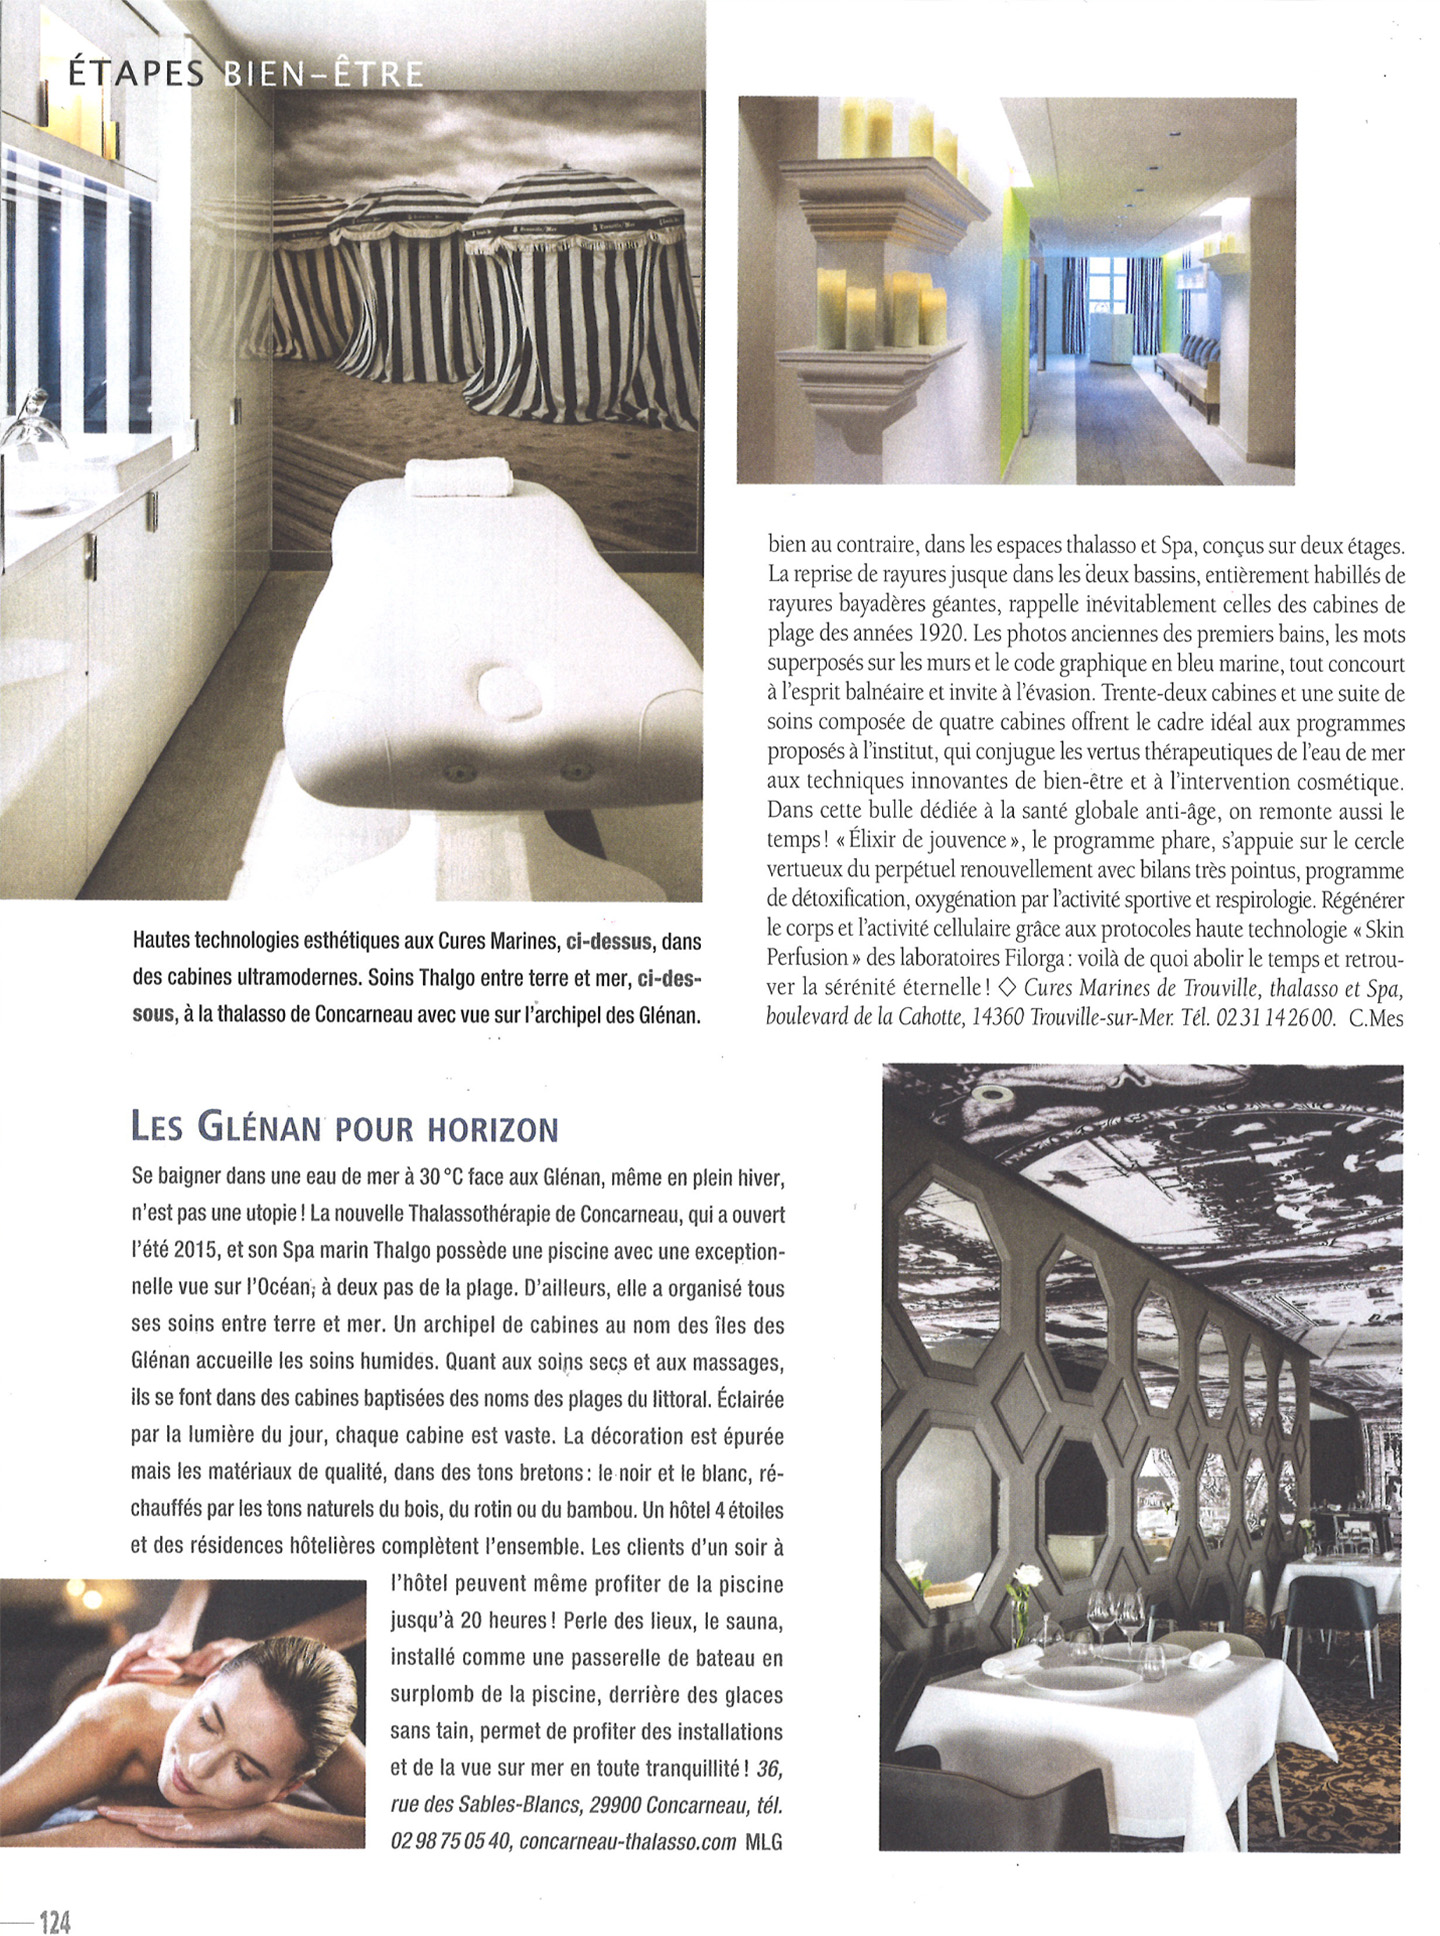 article on the cures marines de trouville, 5 star hotel and spa by the interior design studio jean-philippe nuel, in the magazine maisons cote ouest